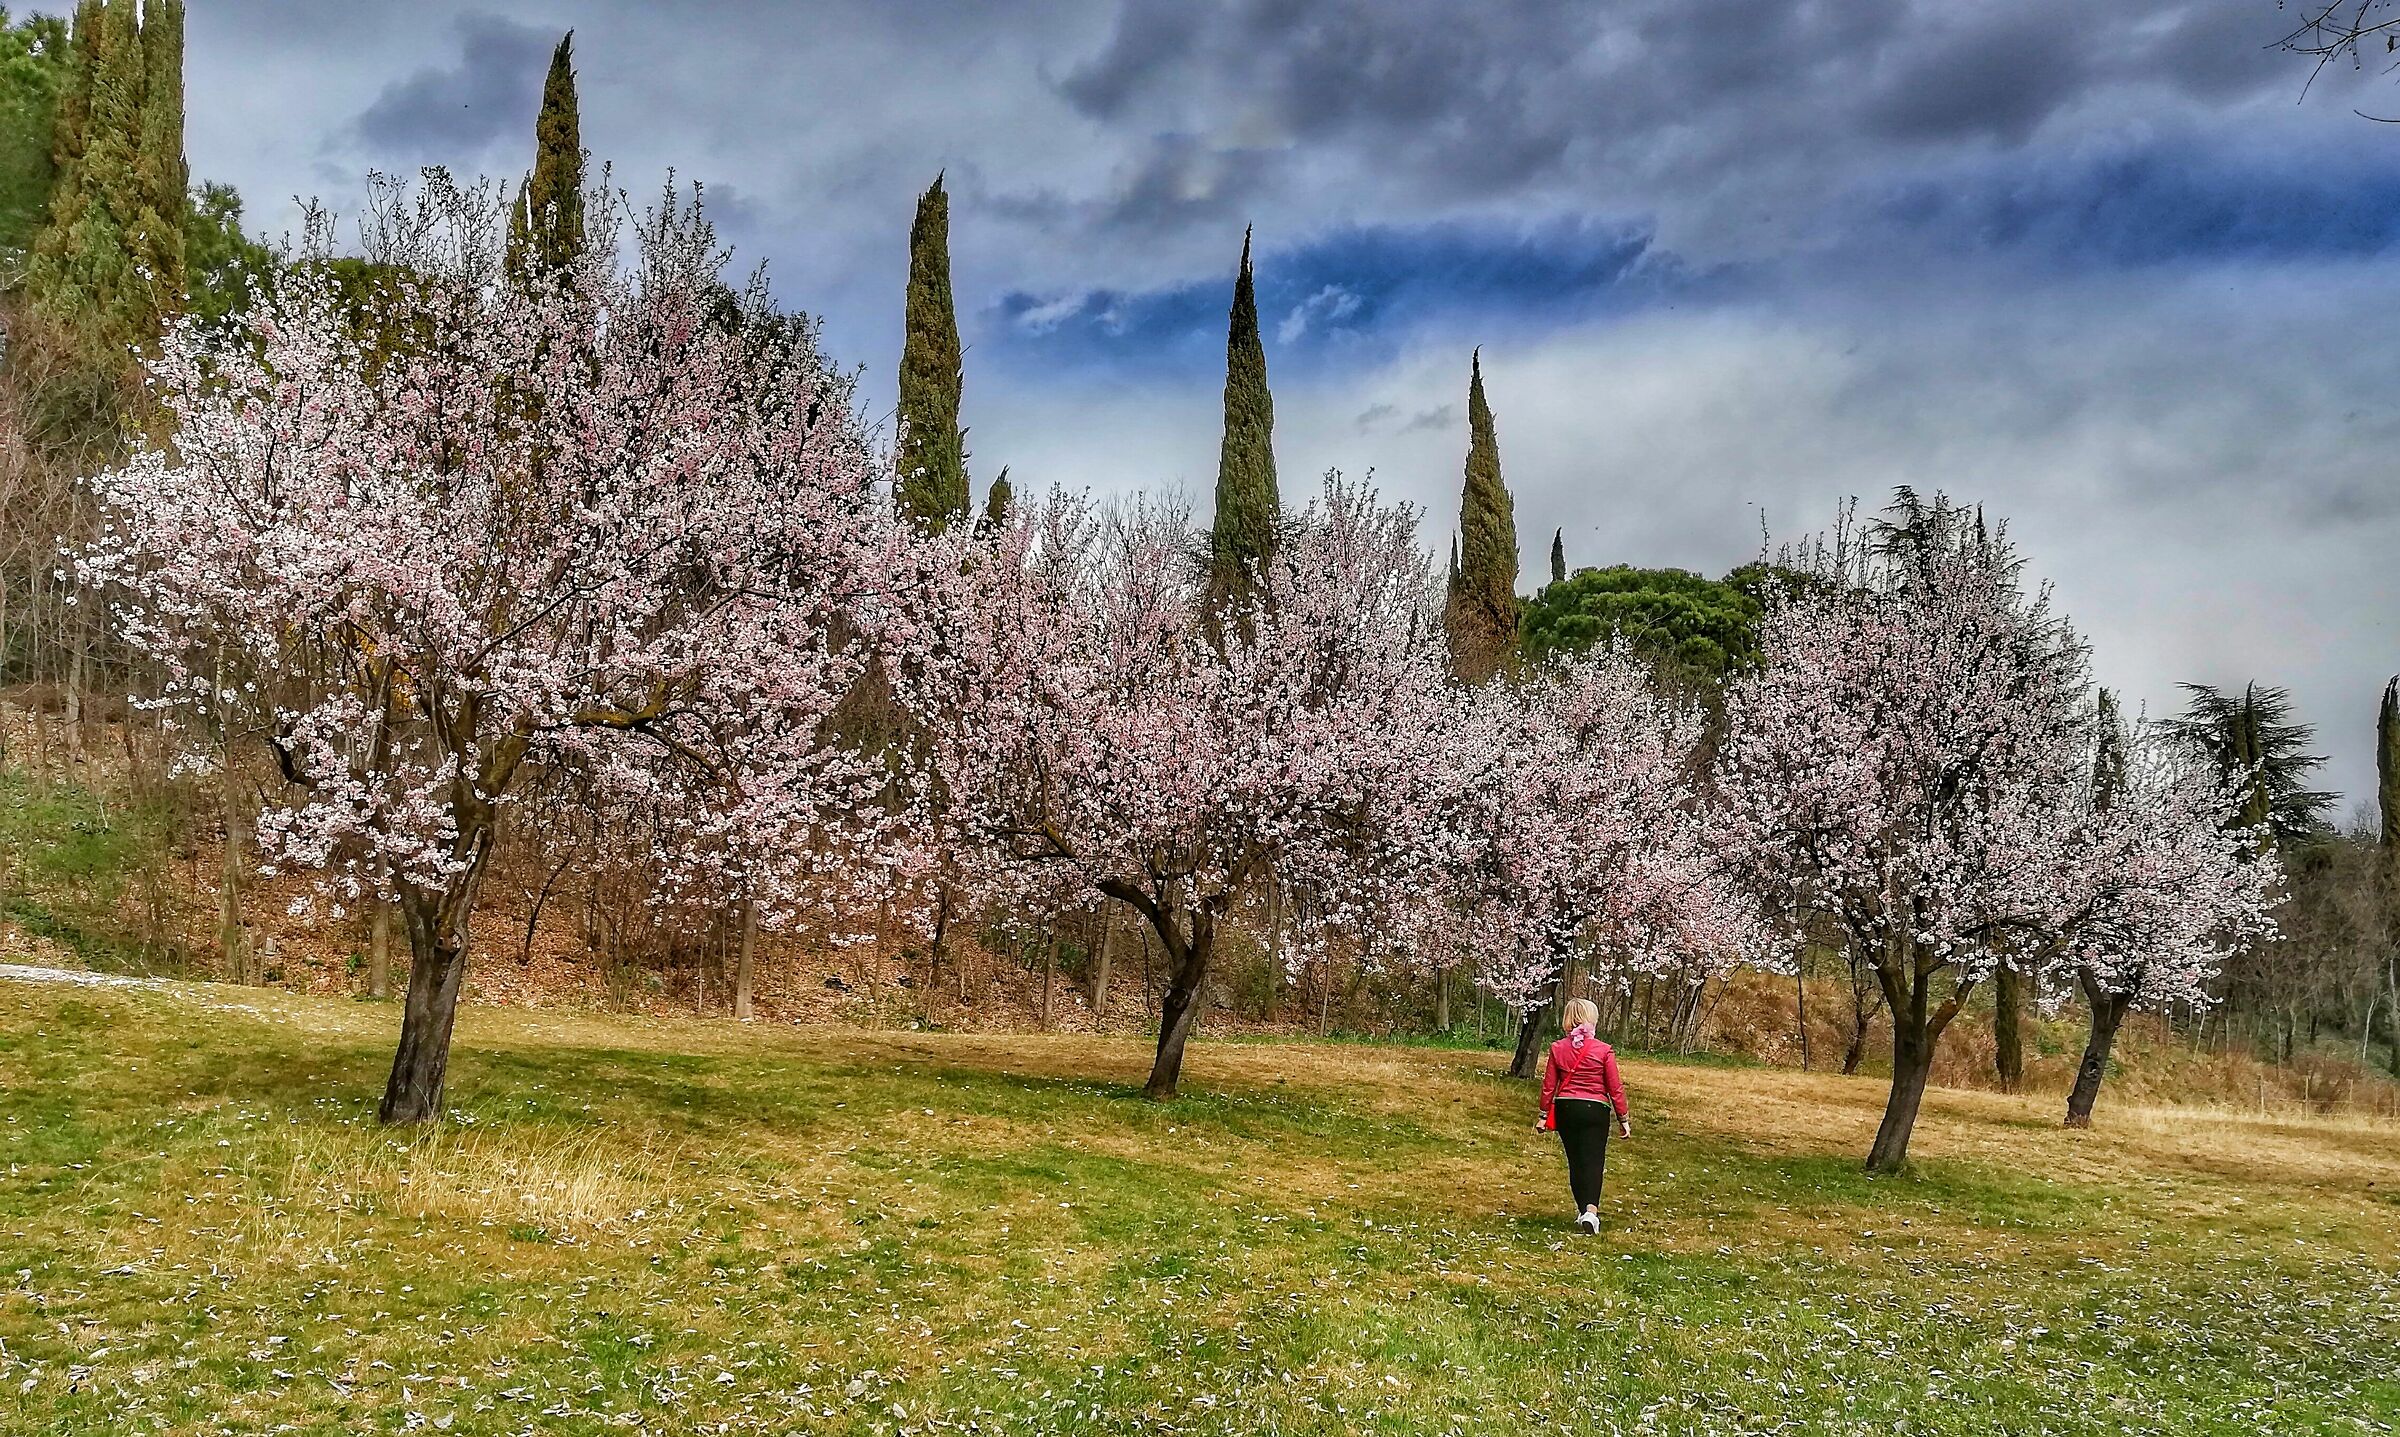 The Almond Trees...